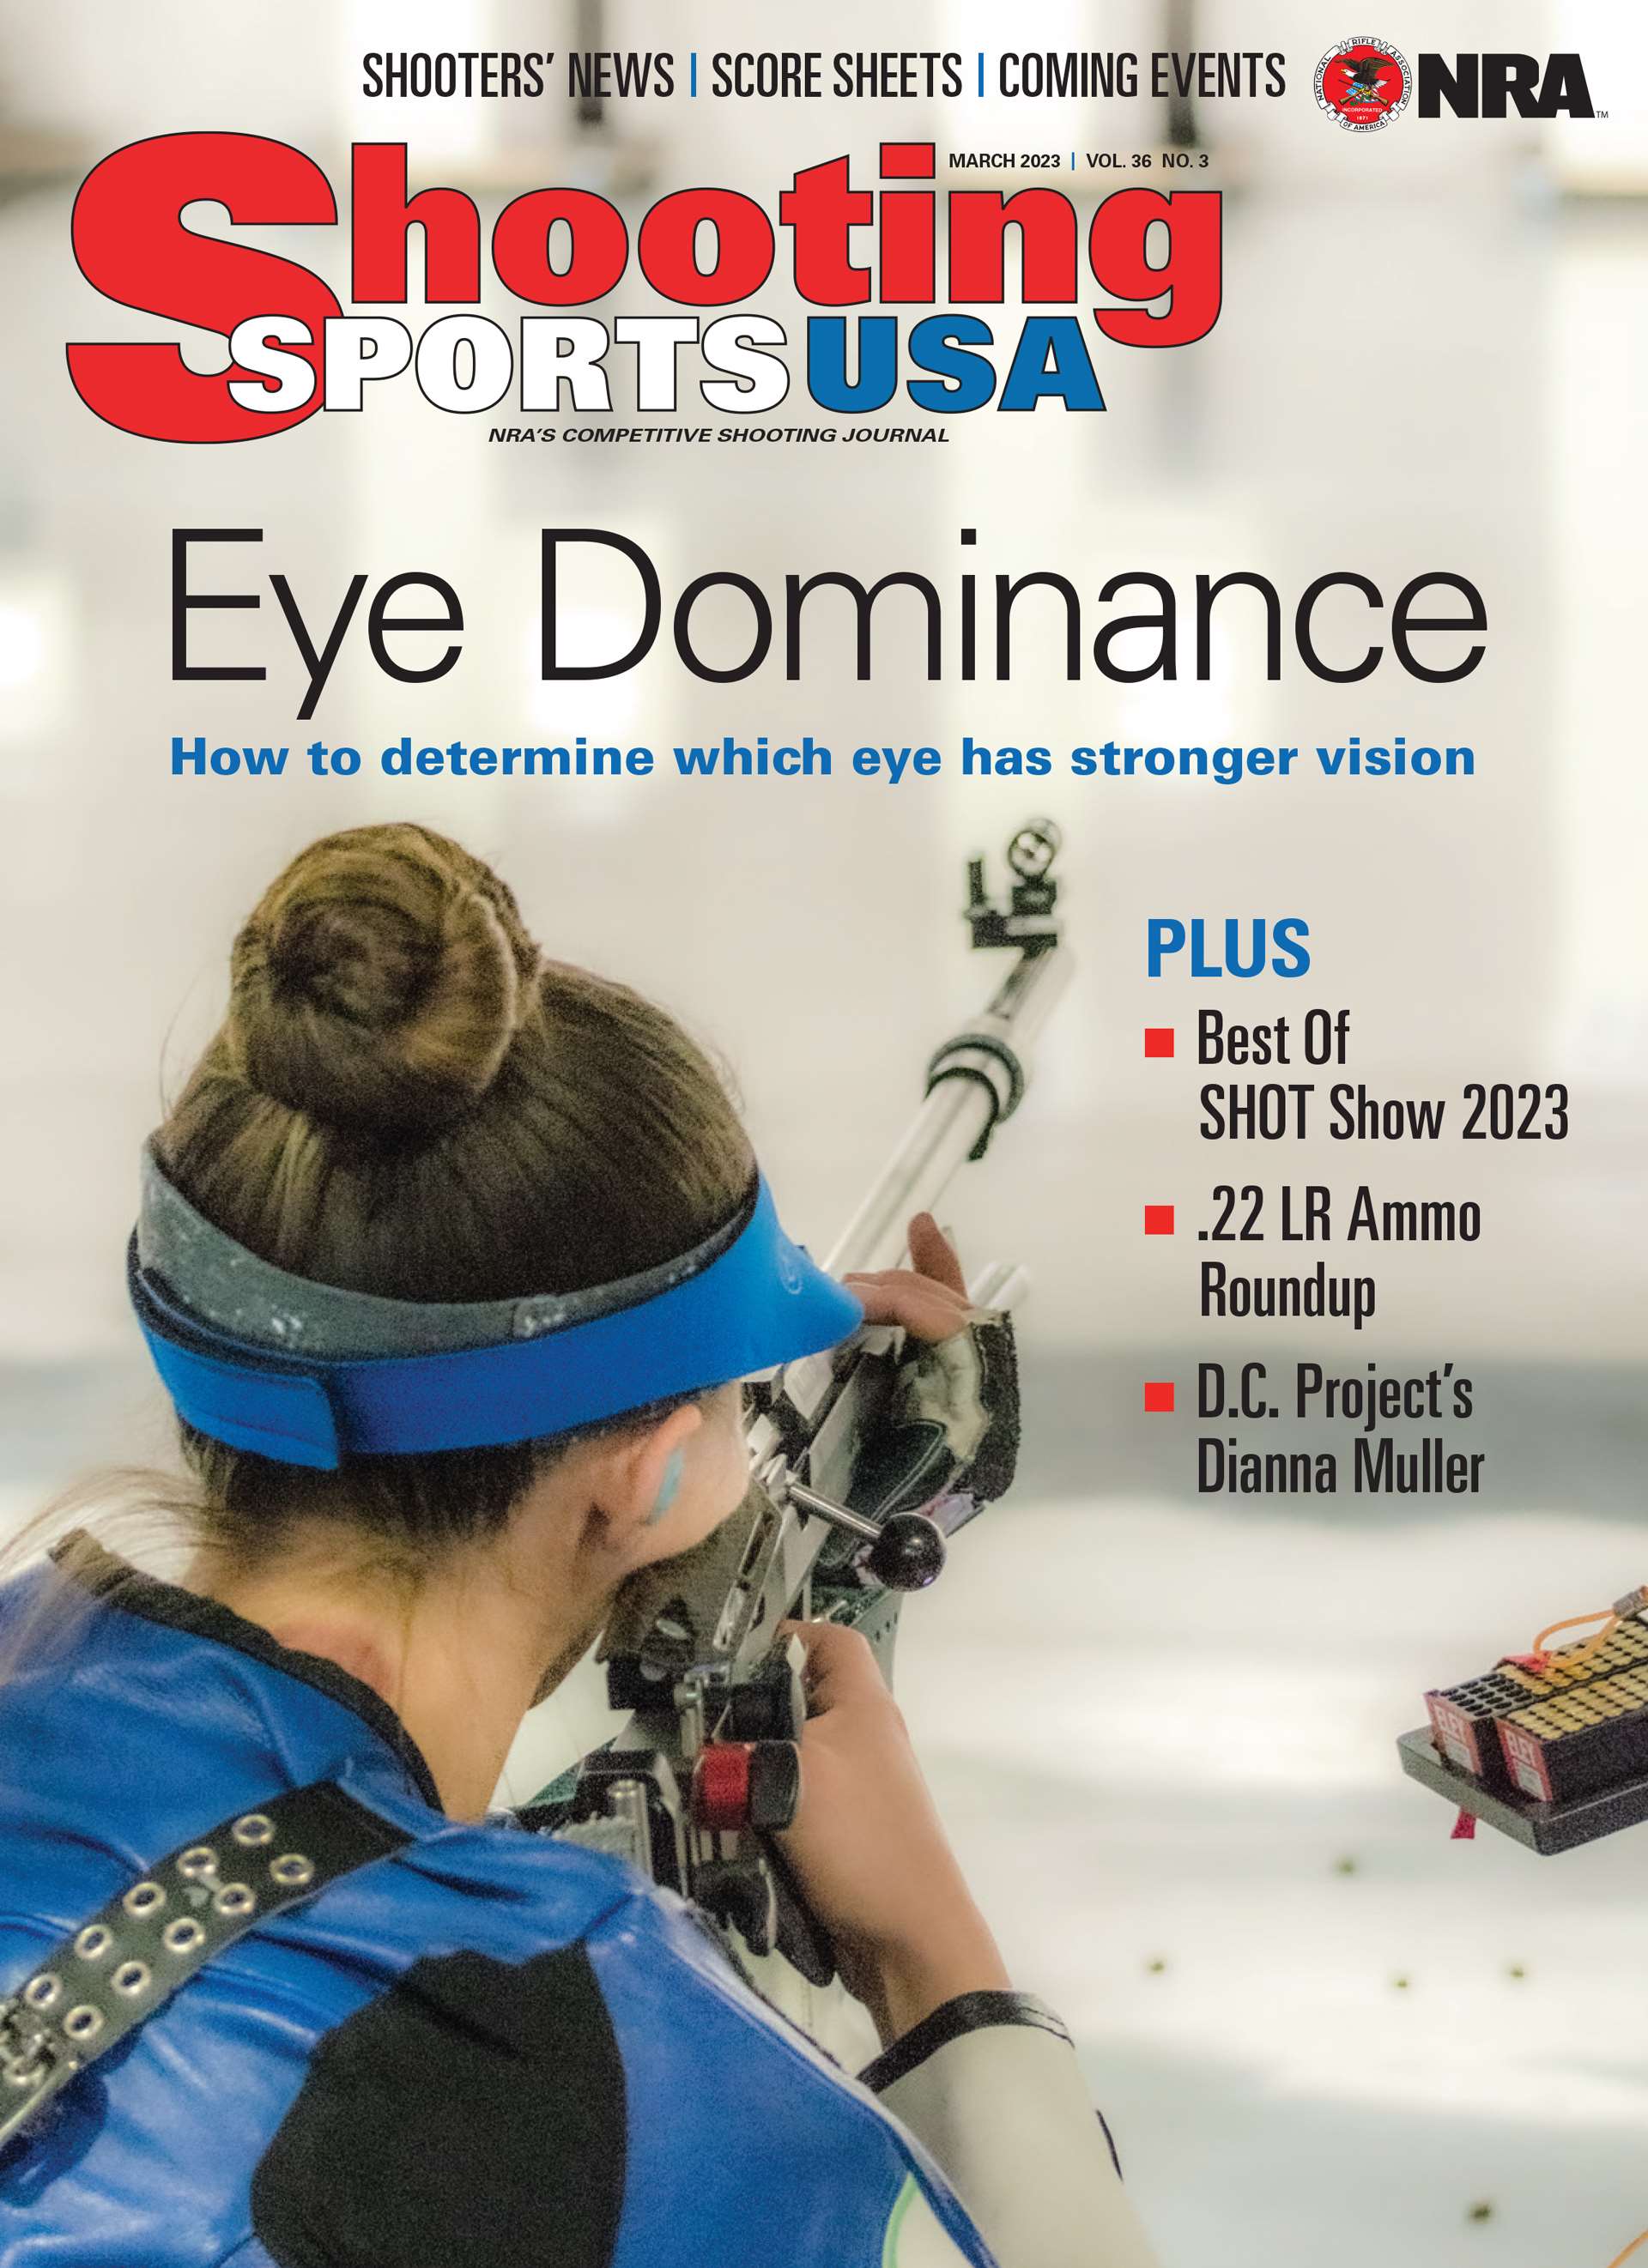 Sighting In New Shooters and Eye Dominance